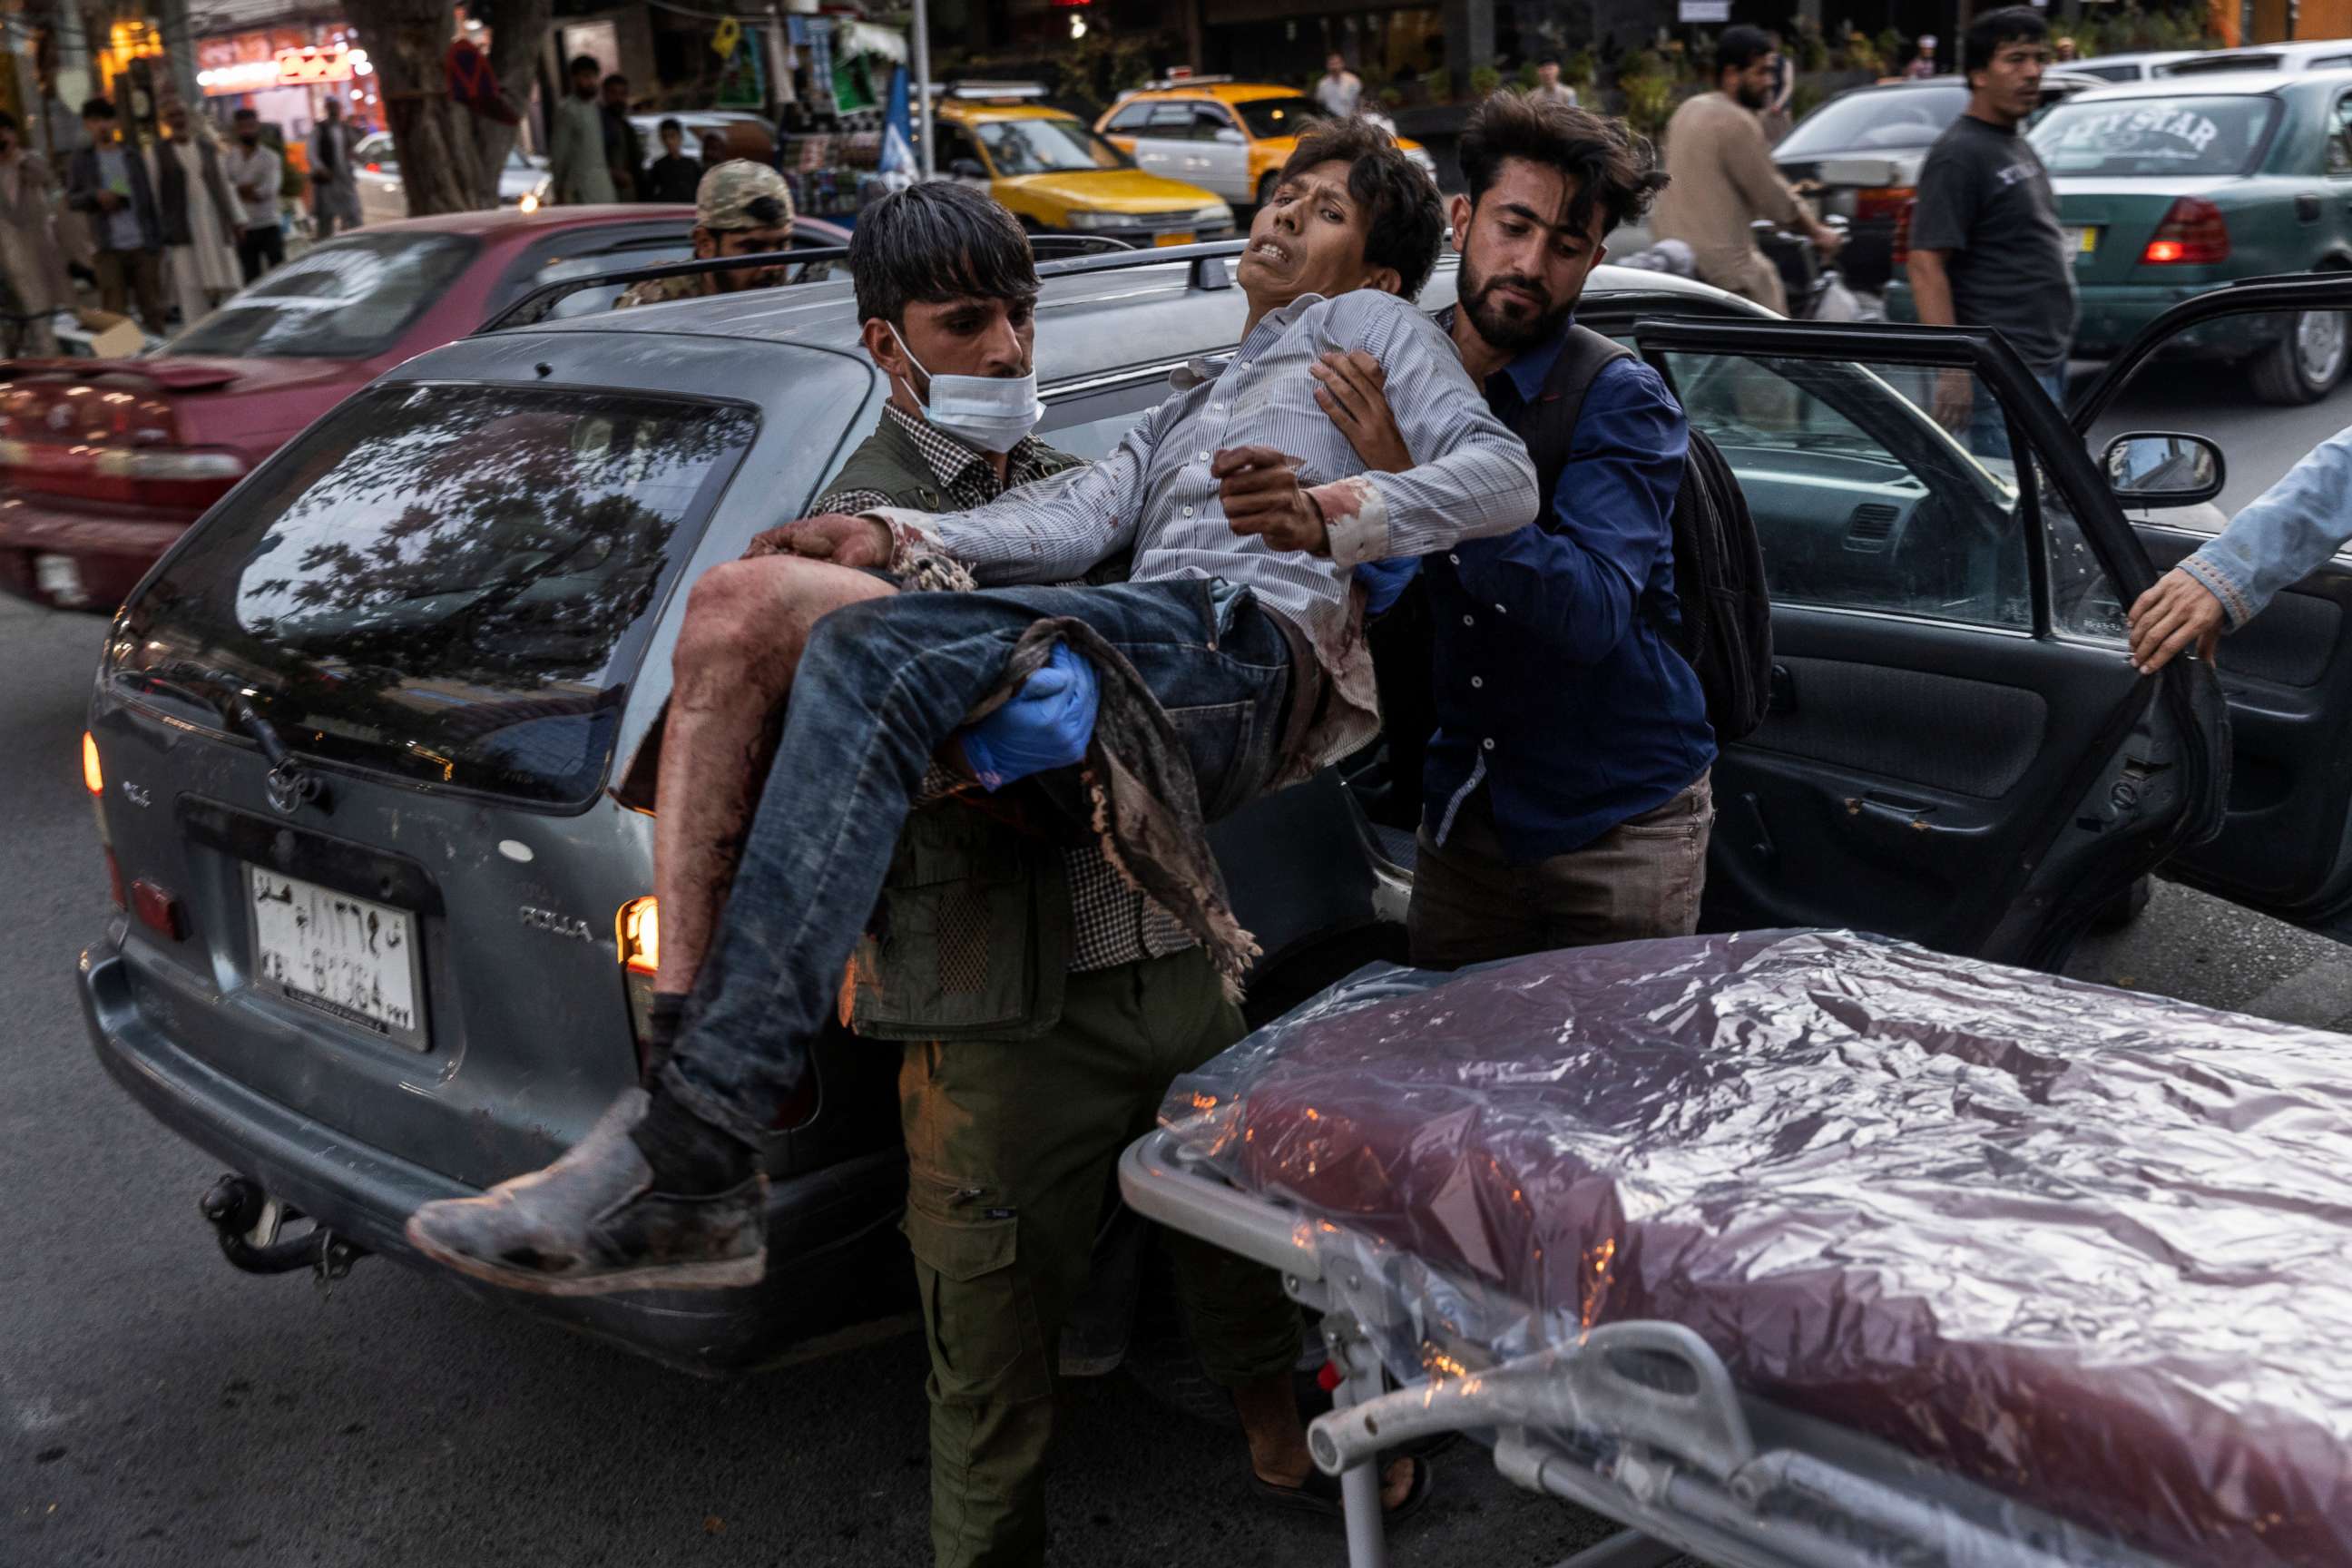 PHOTO: People assist a person wounded in a bomb blast outside the Kabul airport in Afghanistan, Aug. 26, 2021, at a hospital in Kabul.